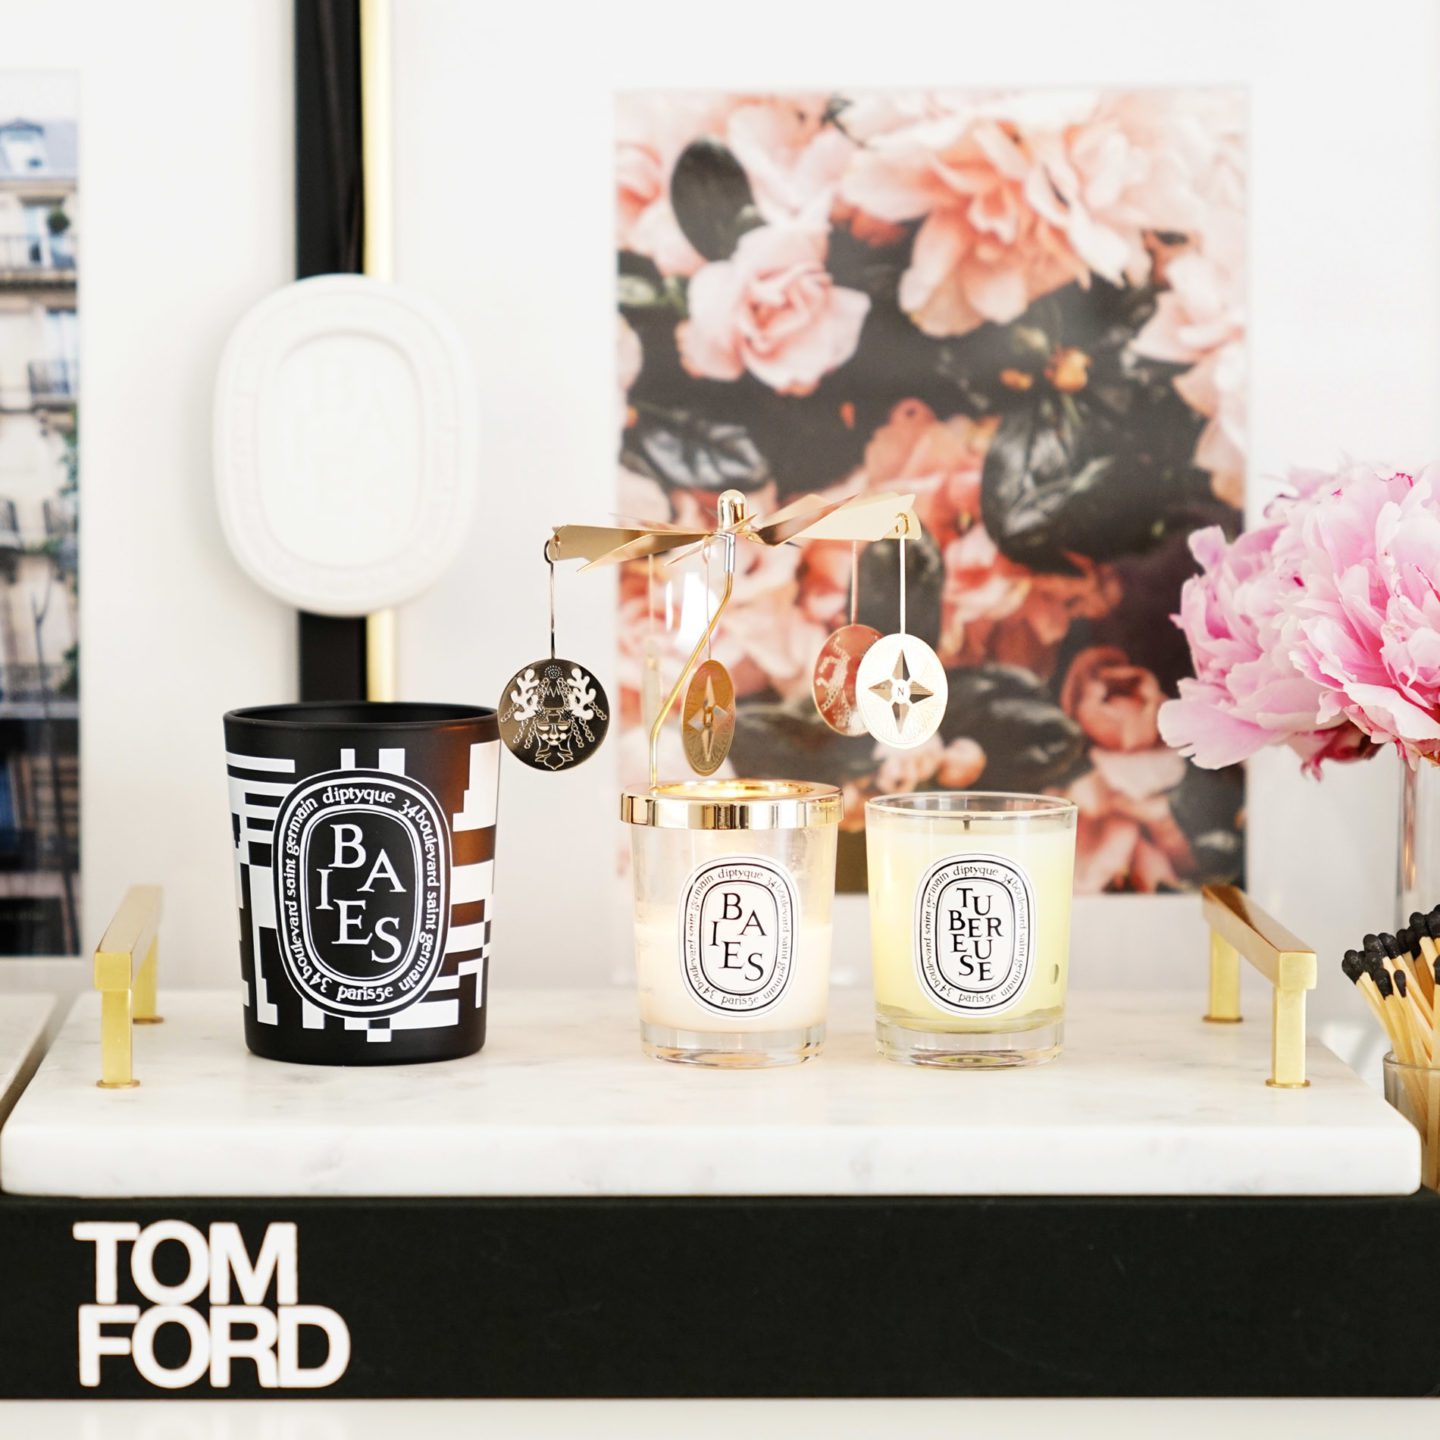 Diptyque Black Friday 2018 and Mini Carousel Set | The Beauty Look Book